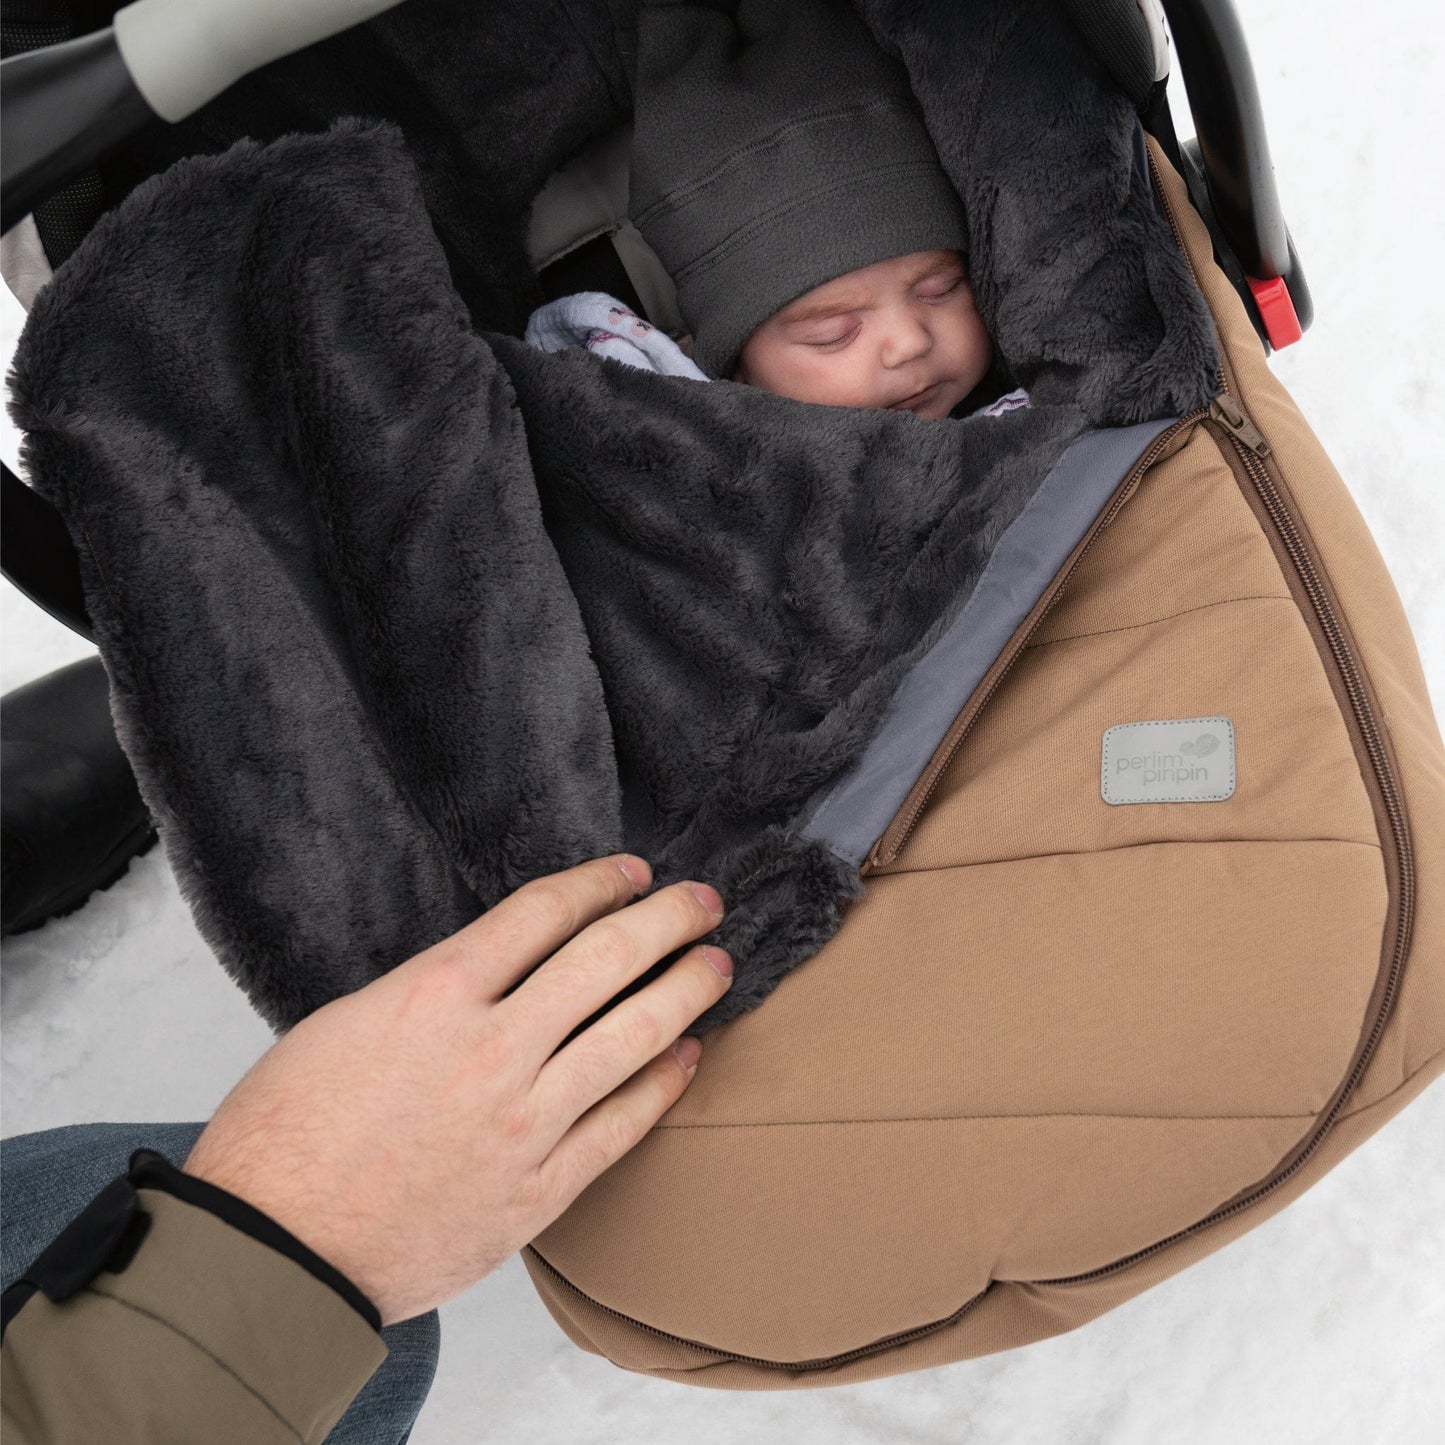 Infant winter bunting bag - Mountains